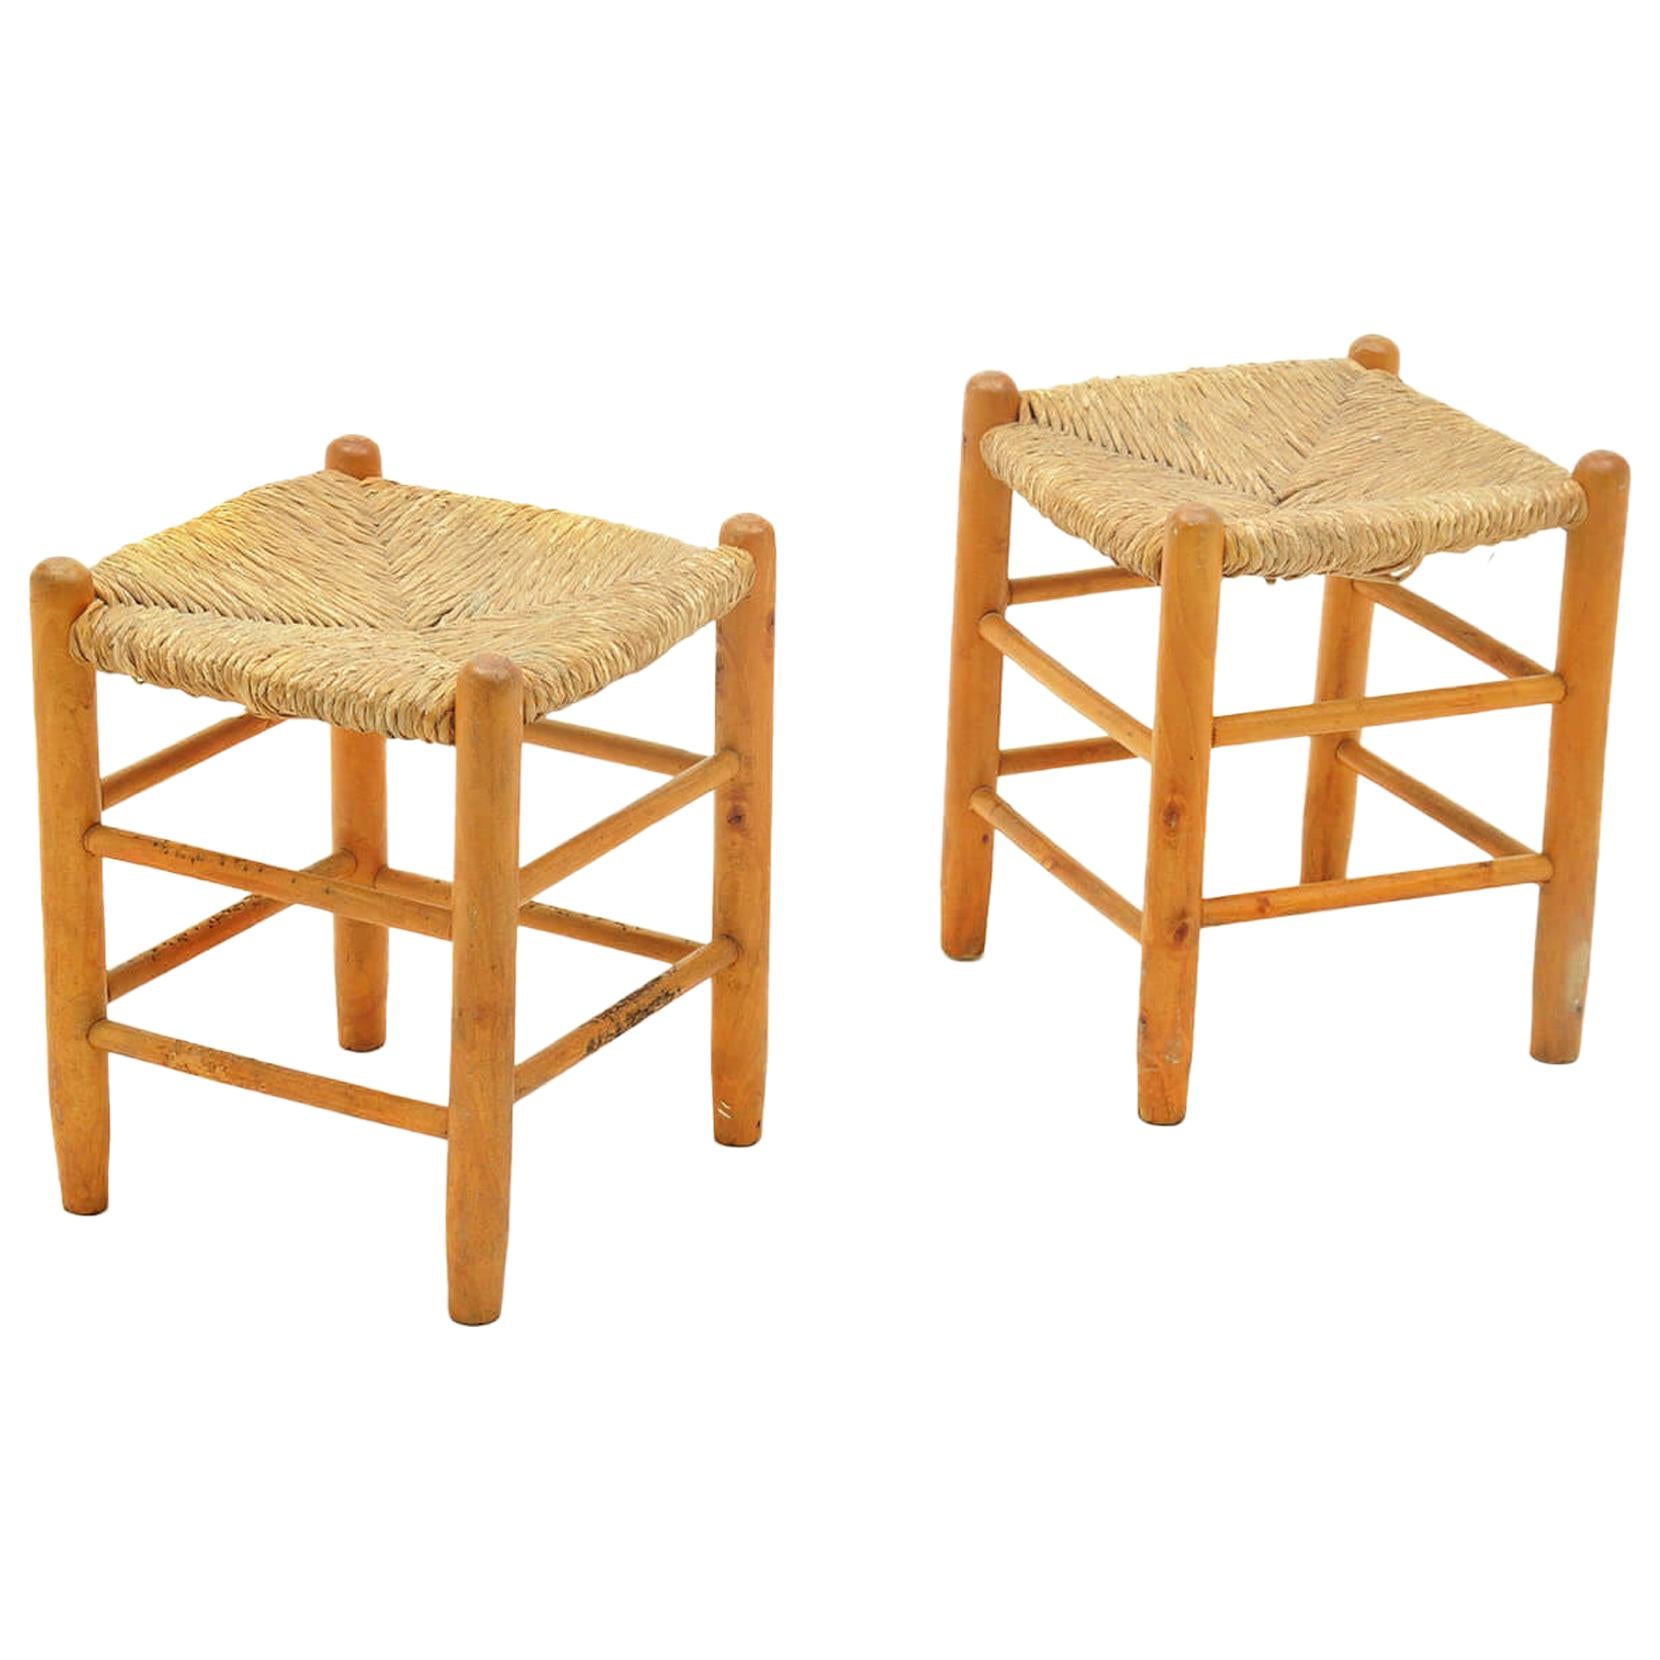 Pair of Wood and Staw Stools by Charlotte Perriand for L'équipement de la Maison